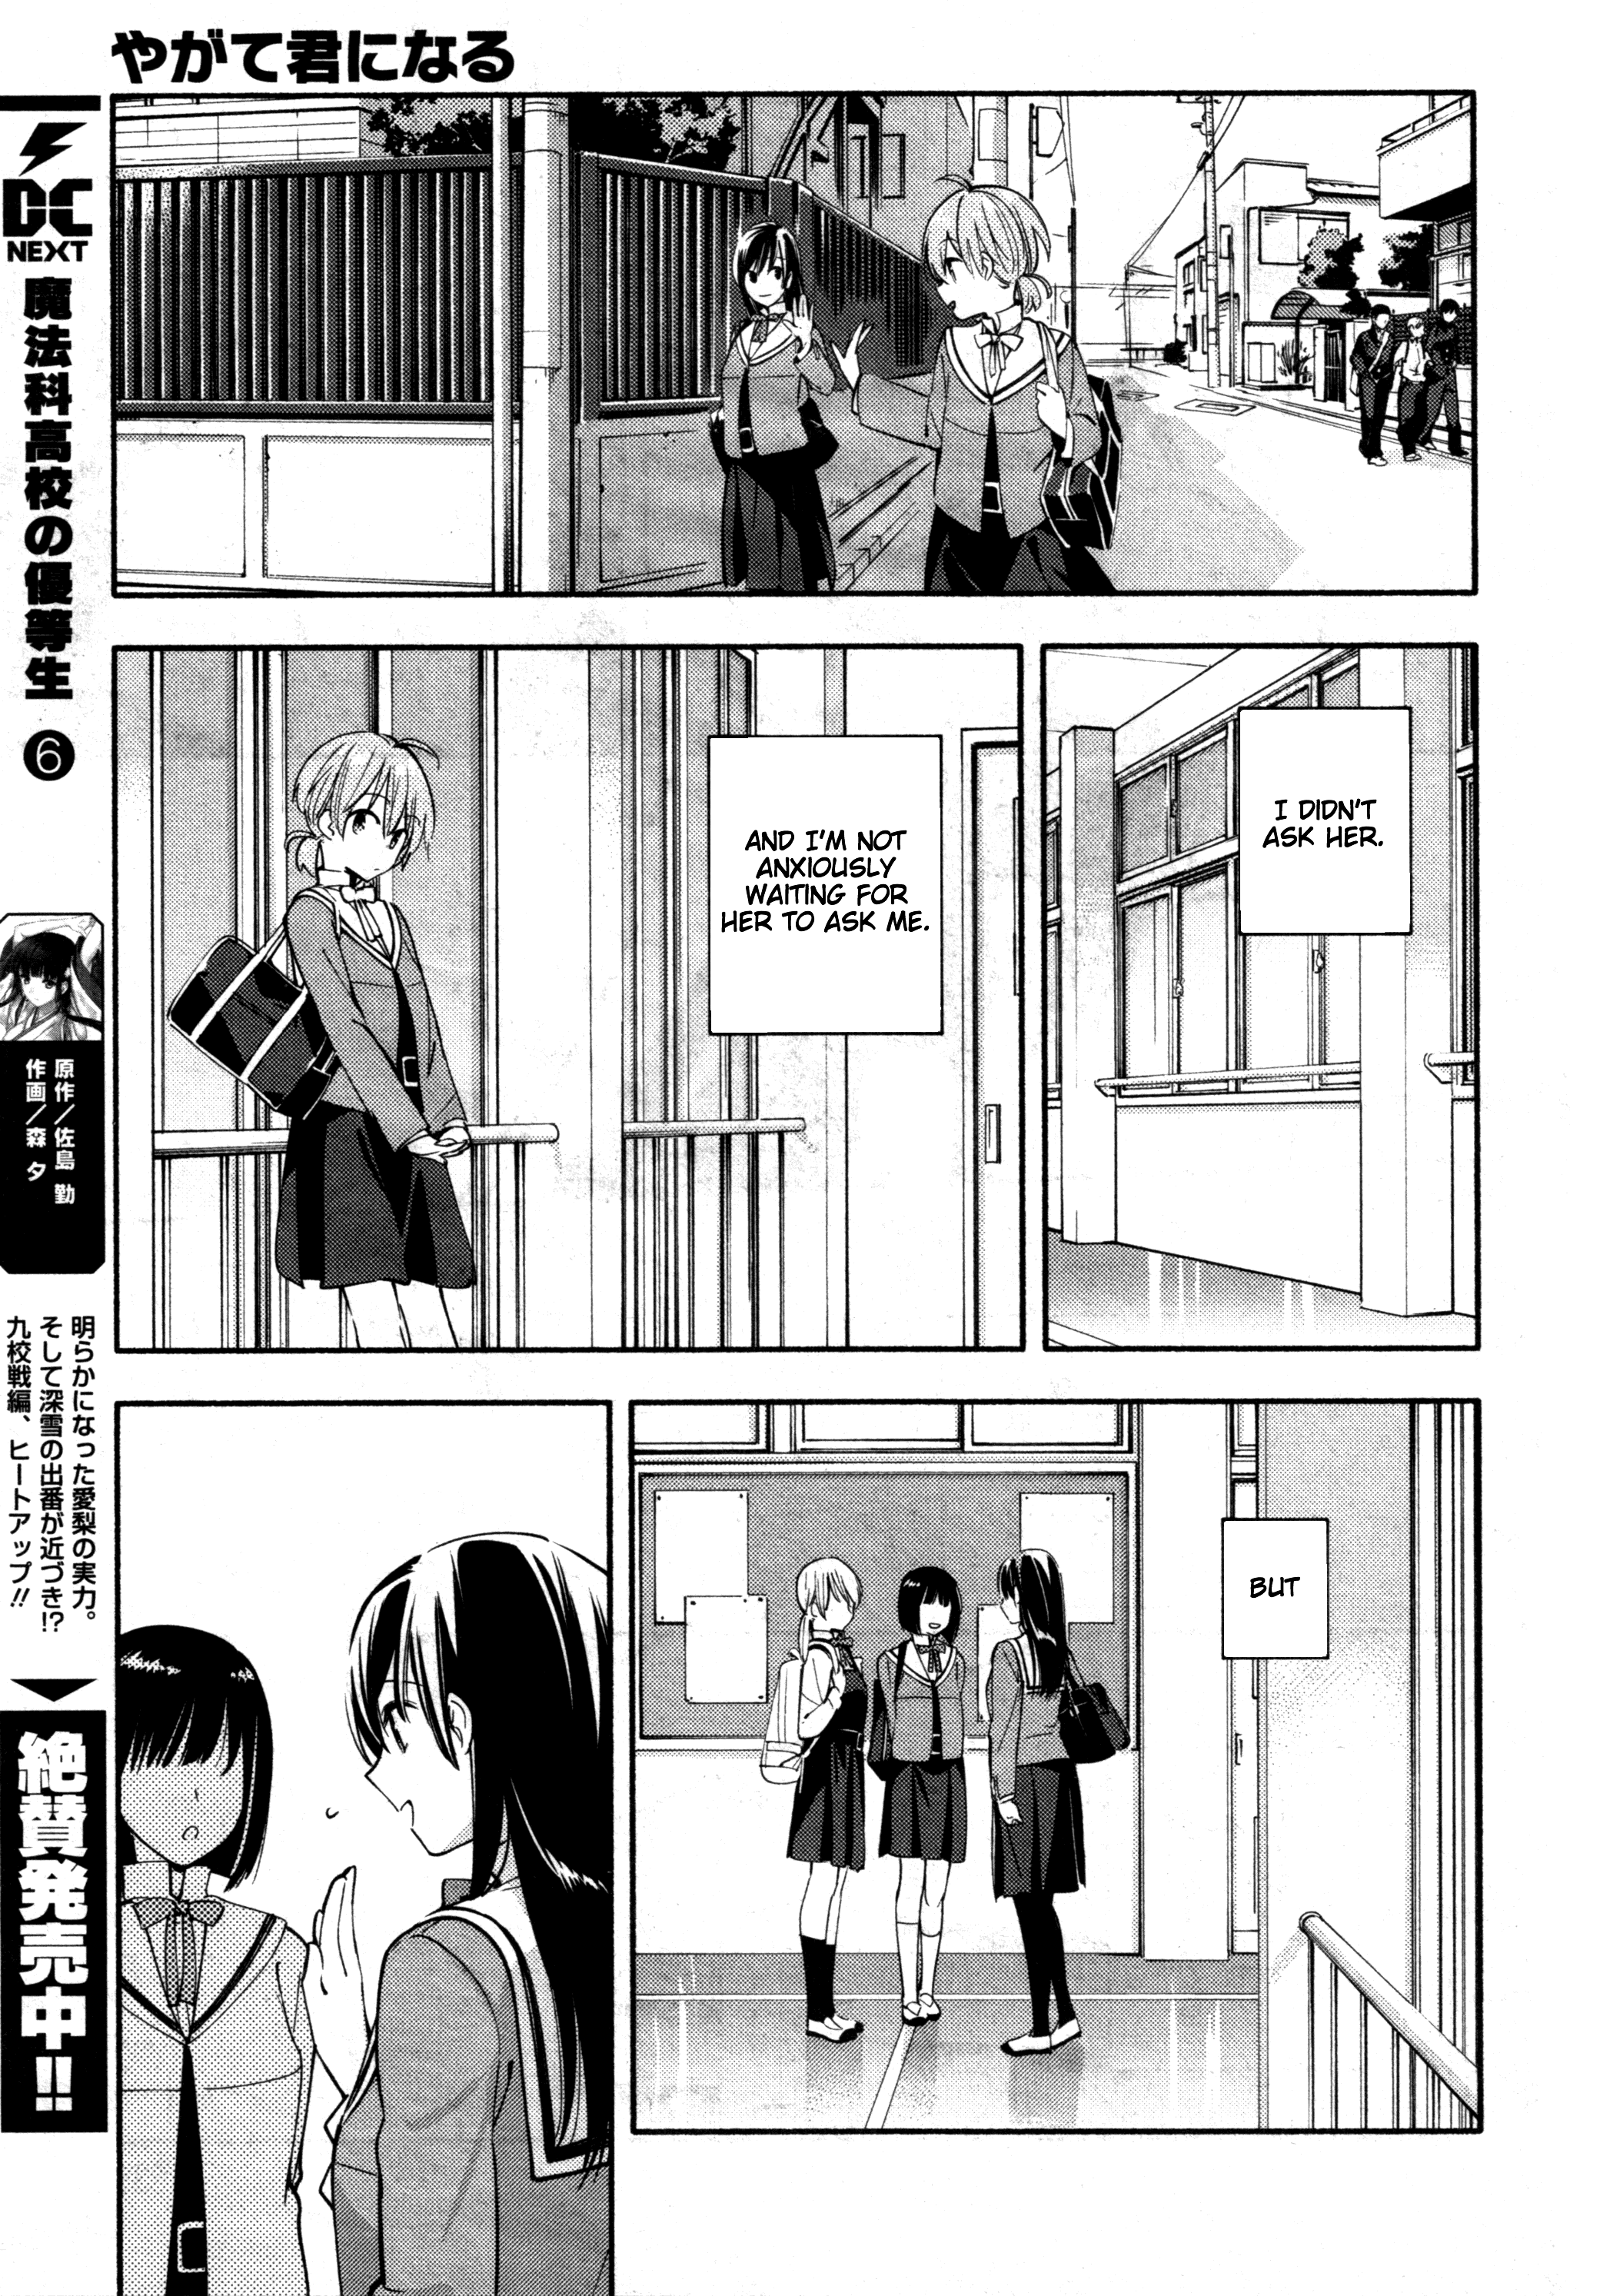 Eventually, I Will Become Yours Vol.2 Ch.8